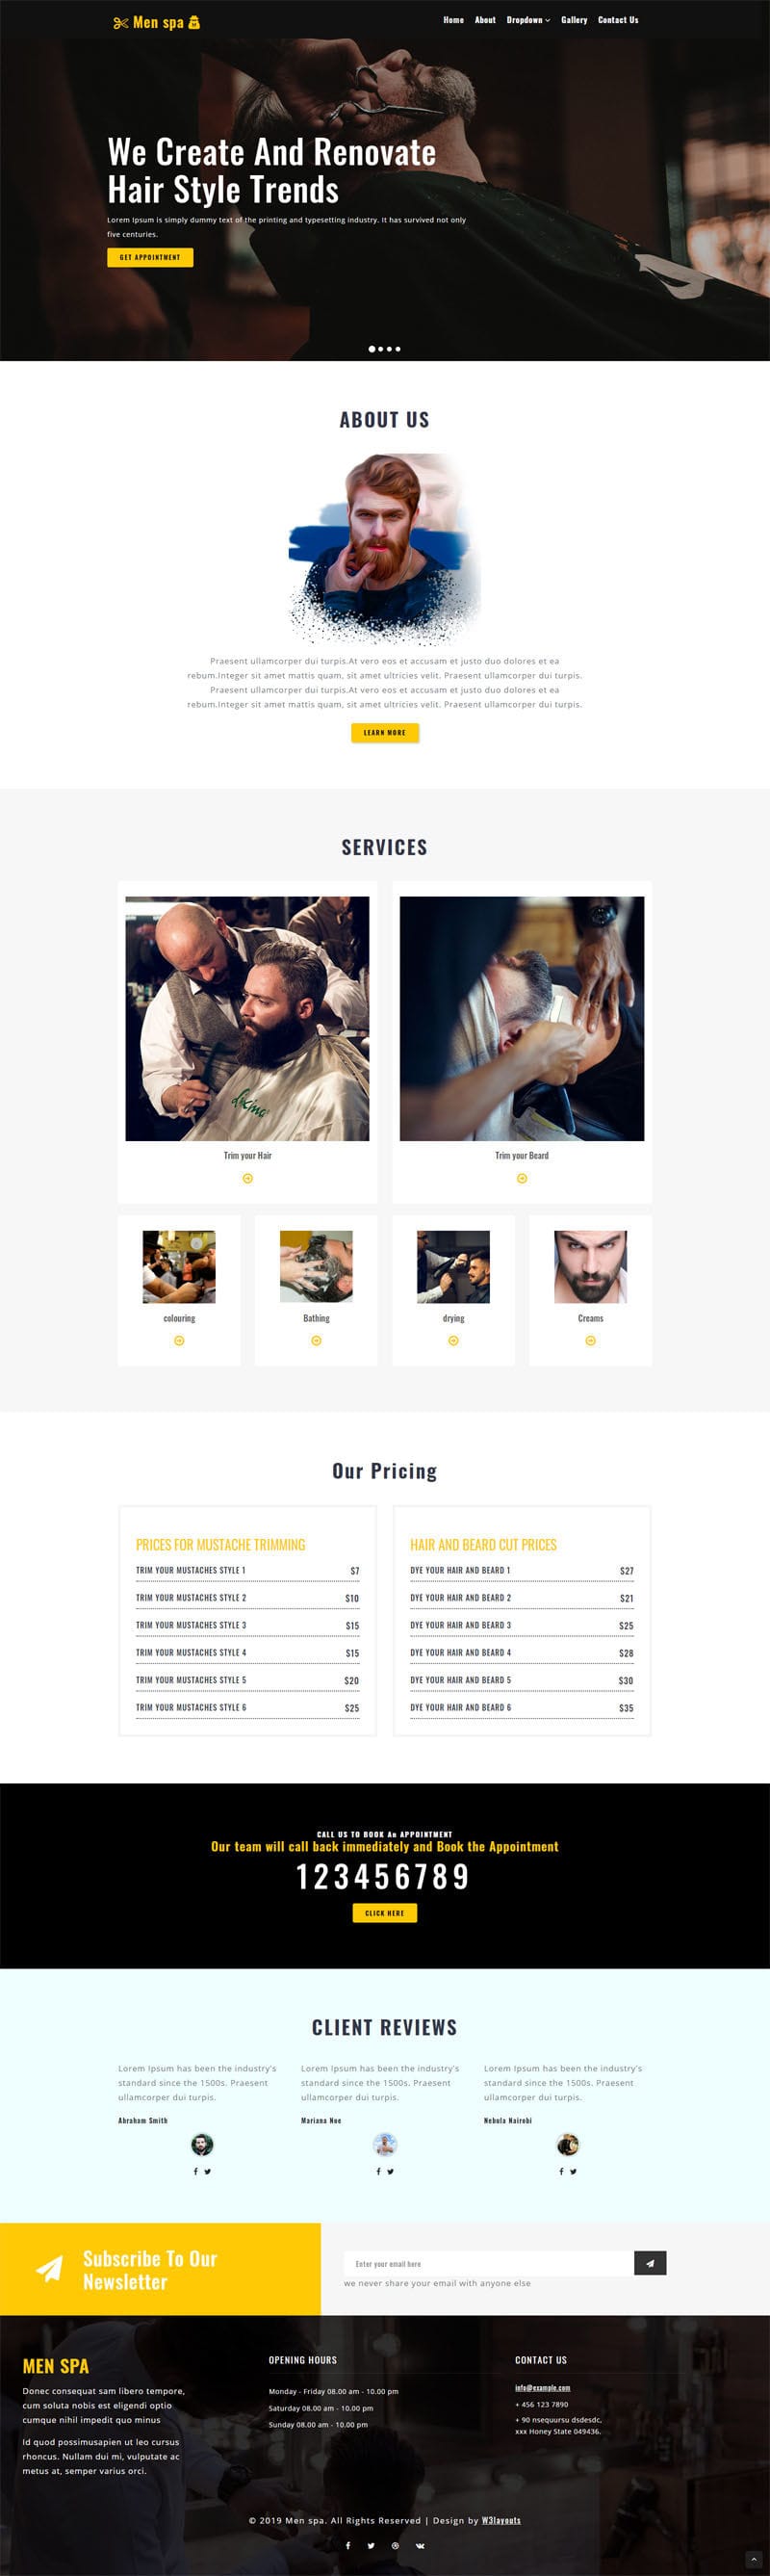 men spa is a website template built for salons, spas and beauty parlours.